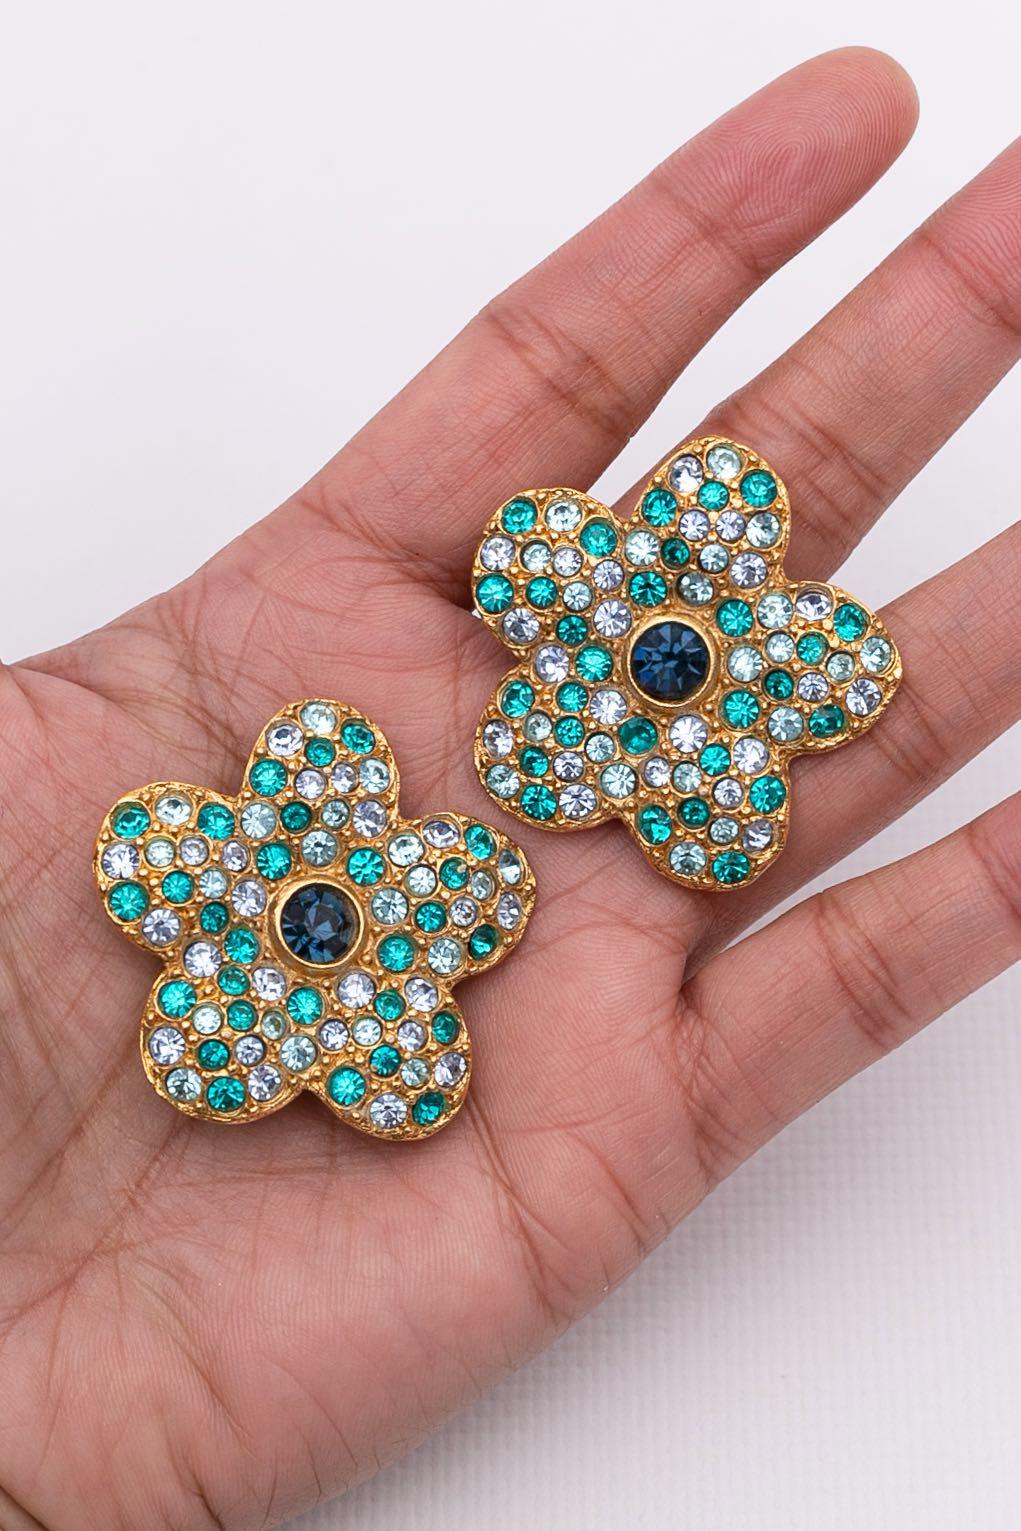 Yves Saint Laurent Clip-on Earrings with Rhinestones For Sale 3